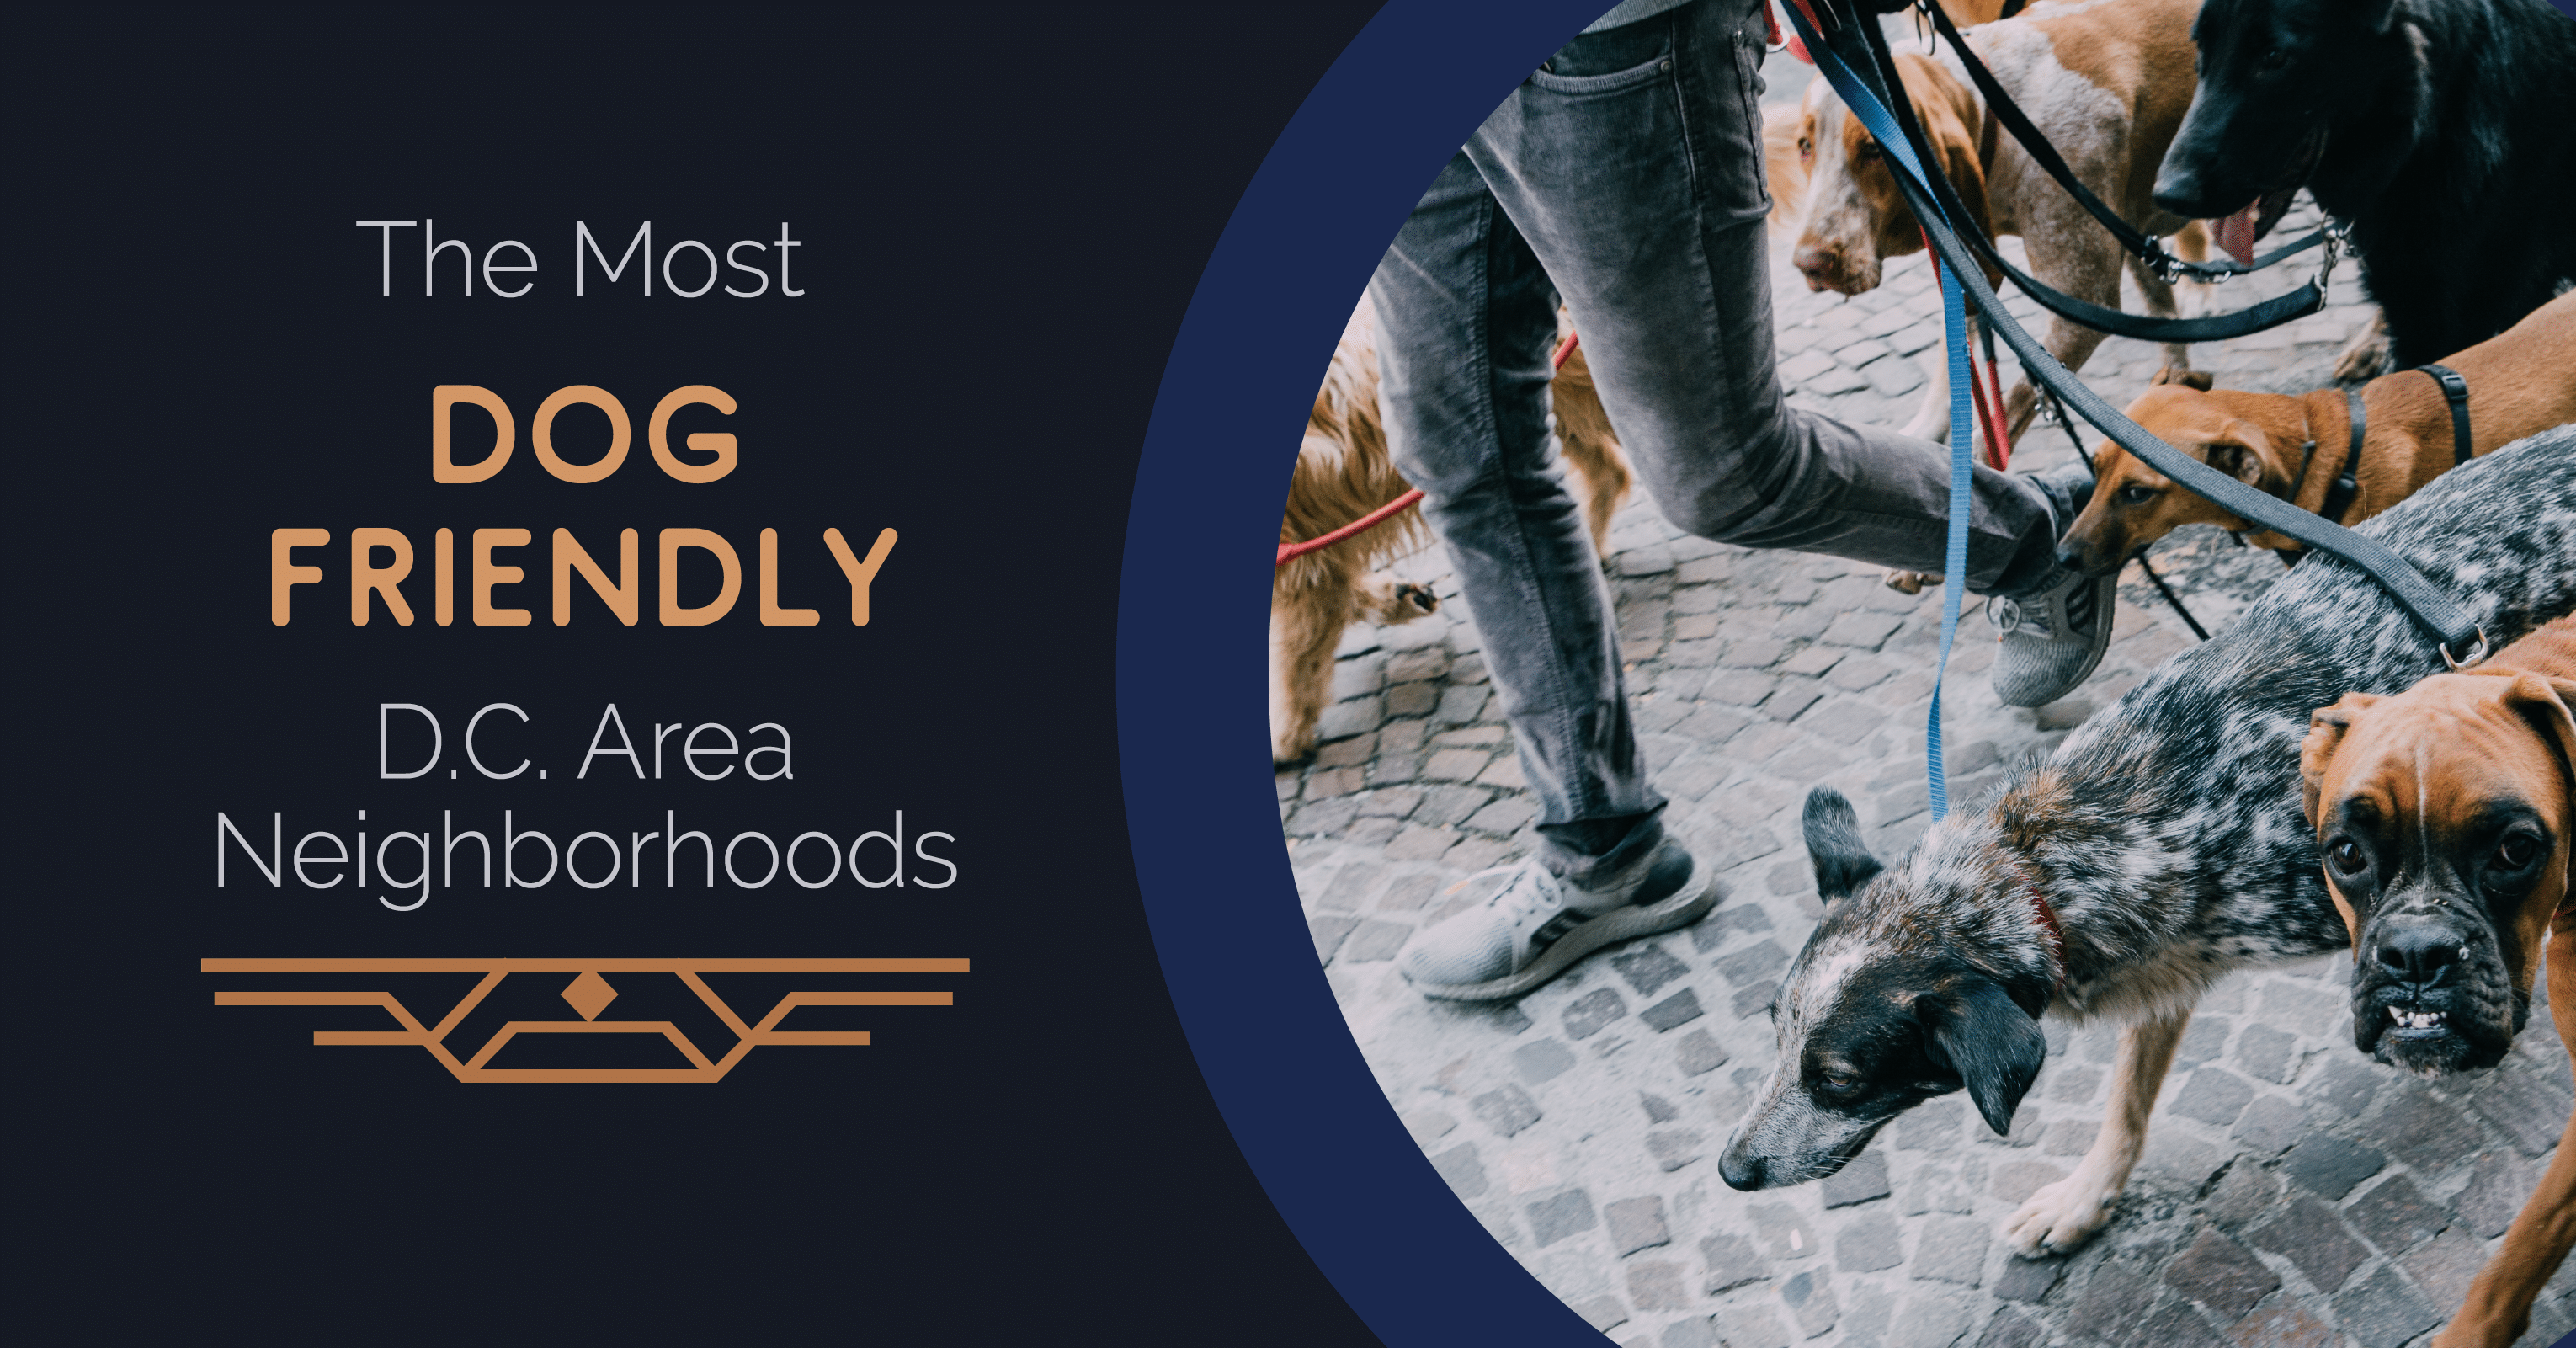 The Most Dog-Friendly D.C. Area Neighborhoods